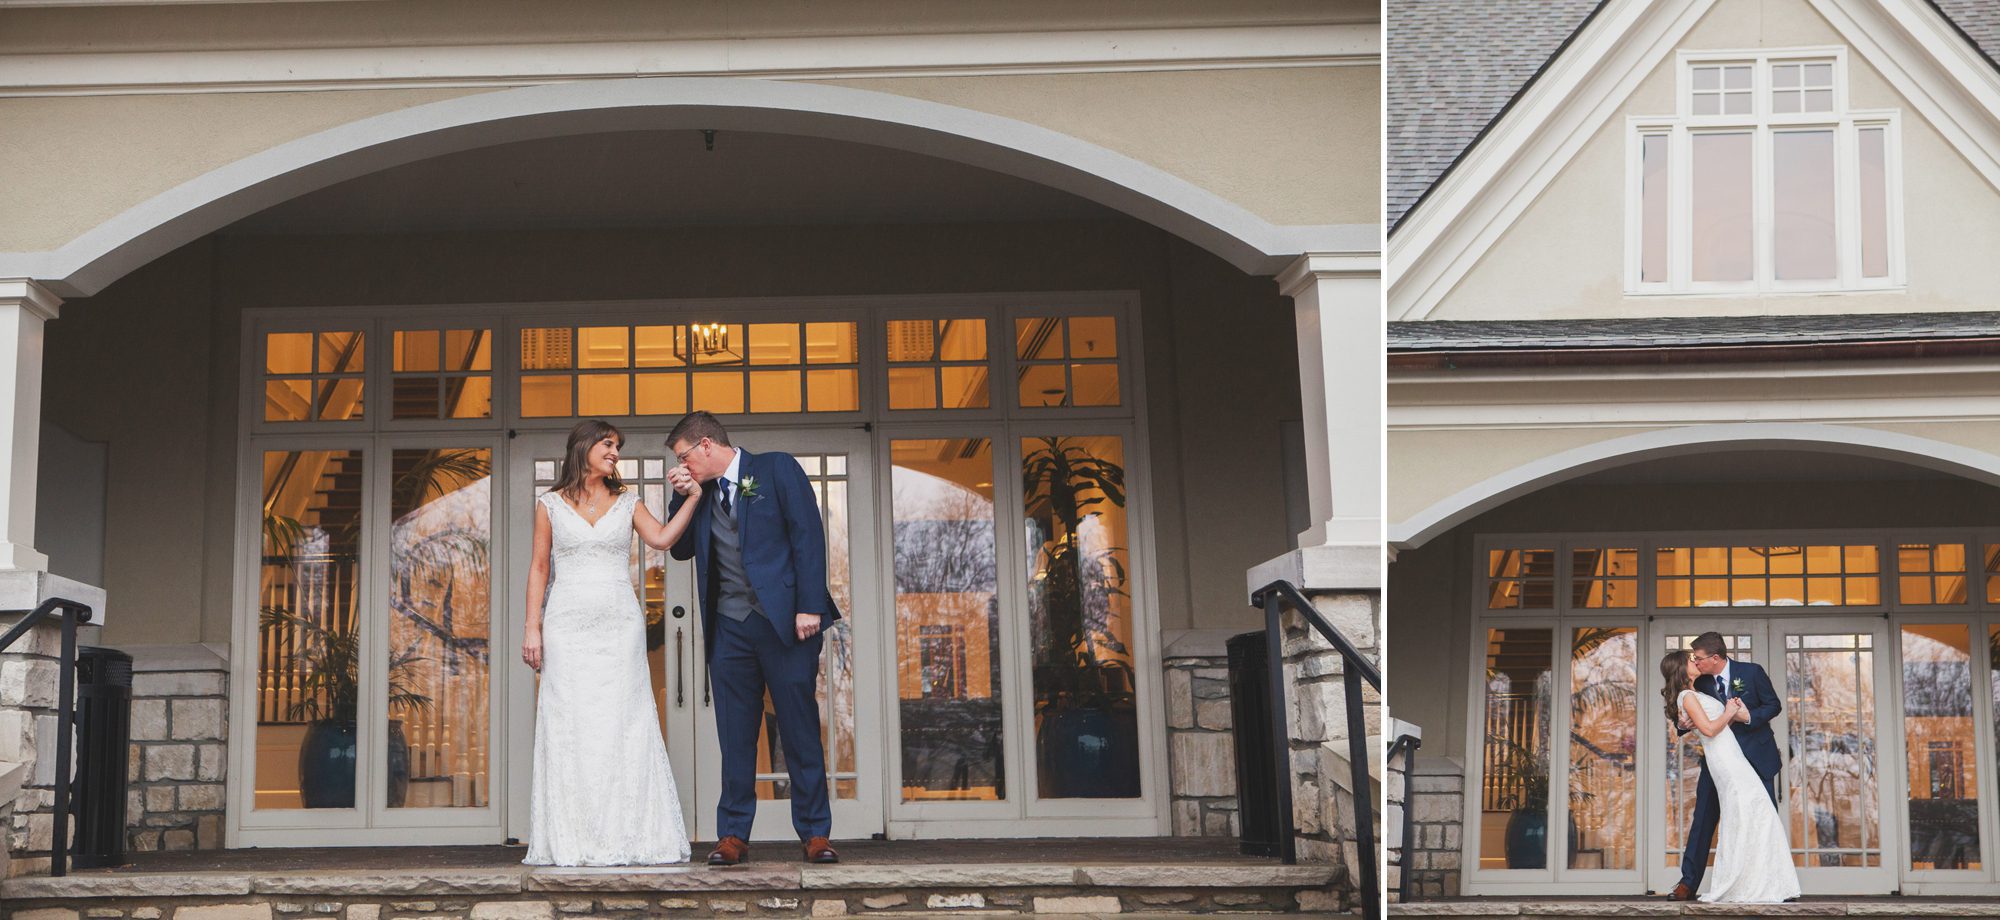 Bride and groom photos in front of the clubhouse. Winter wedding at Vanderbilt Legends Golf Course in Brentwood TN, photos by Krista Lee Photography